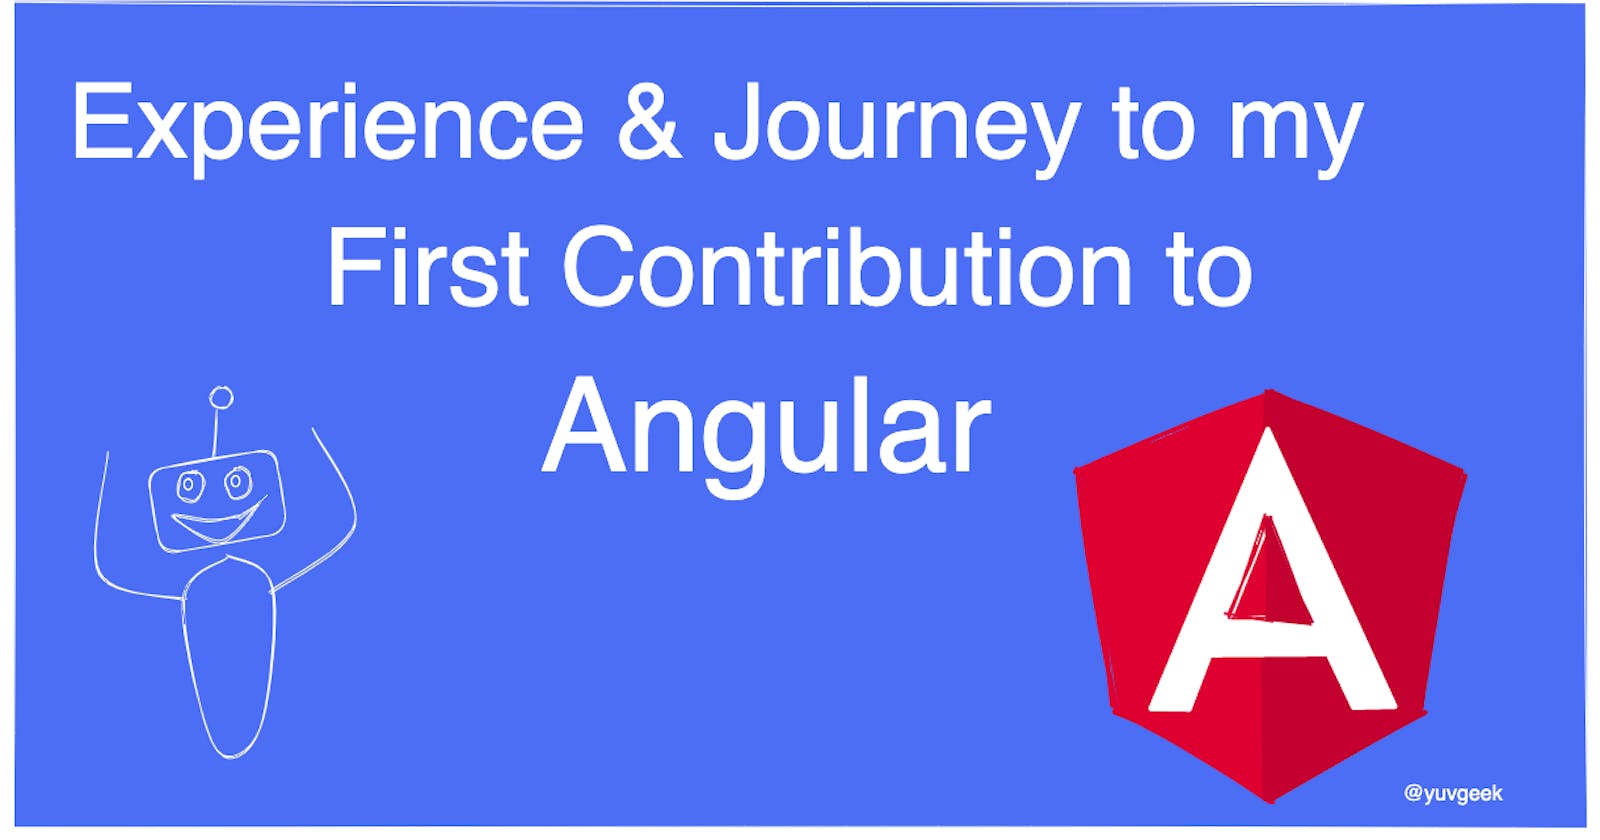 Experience & Journey to my first Contribution to Angular